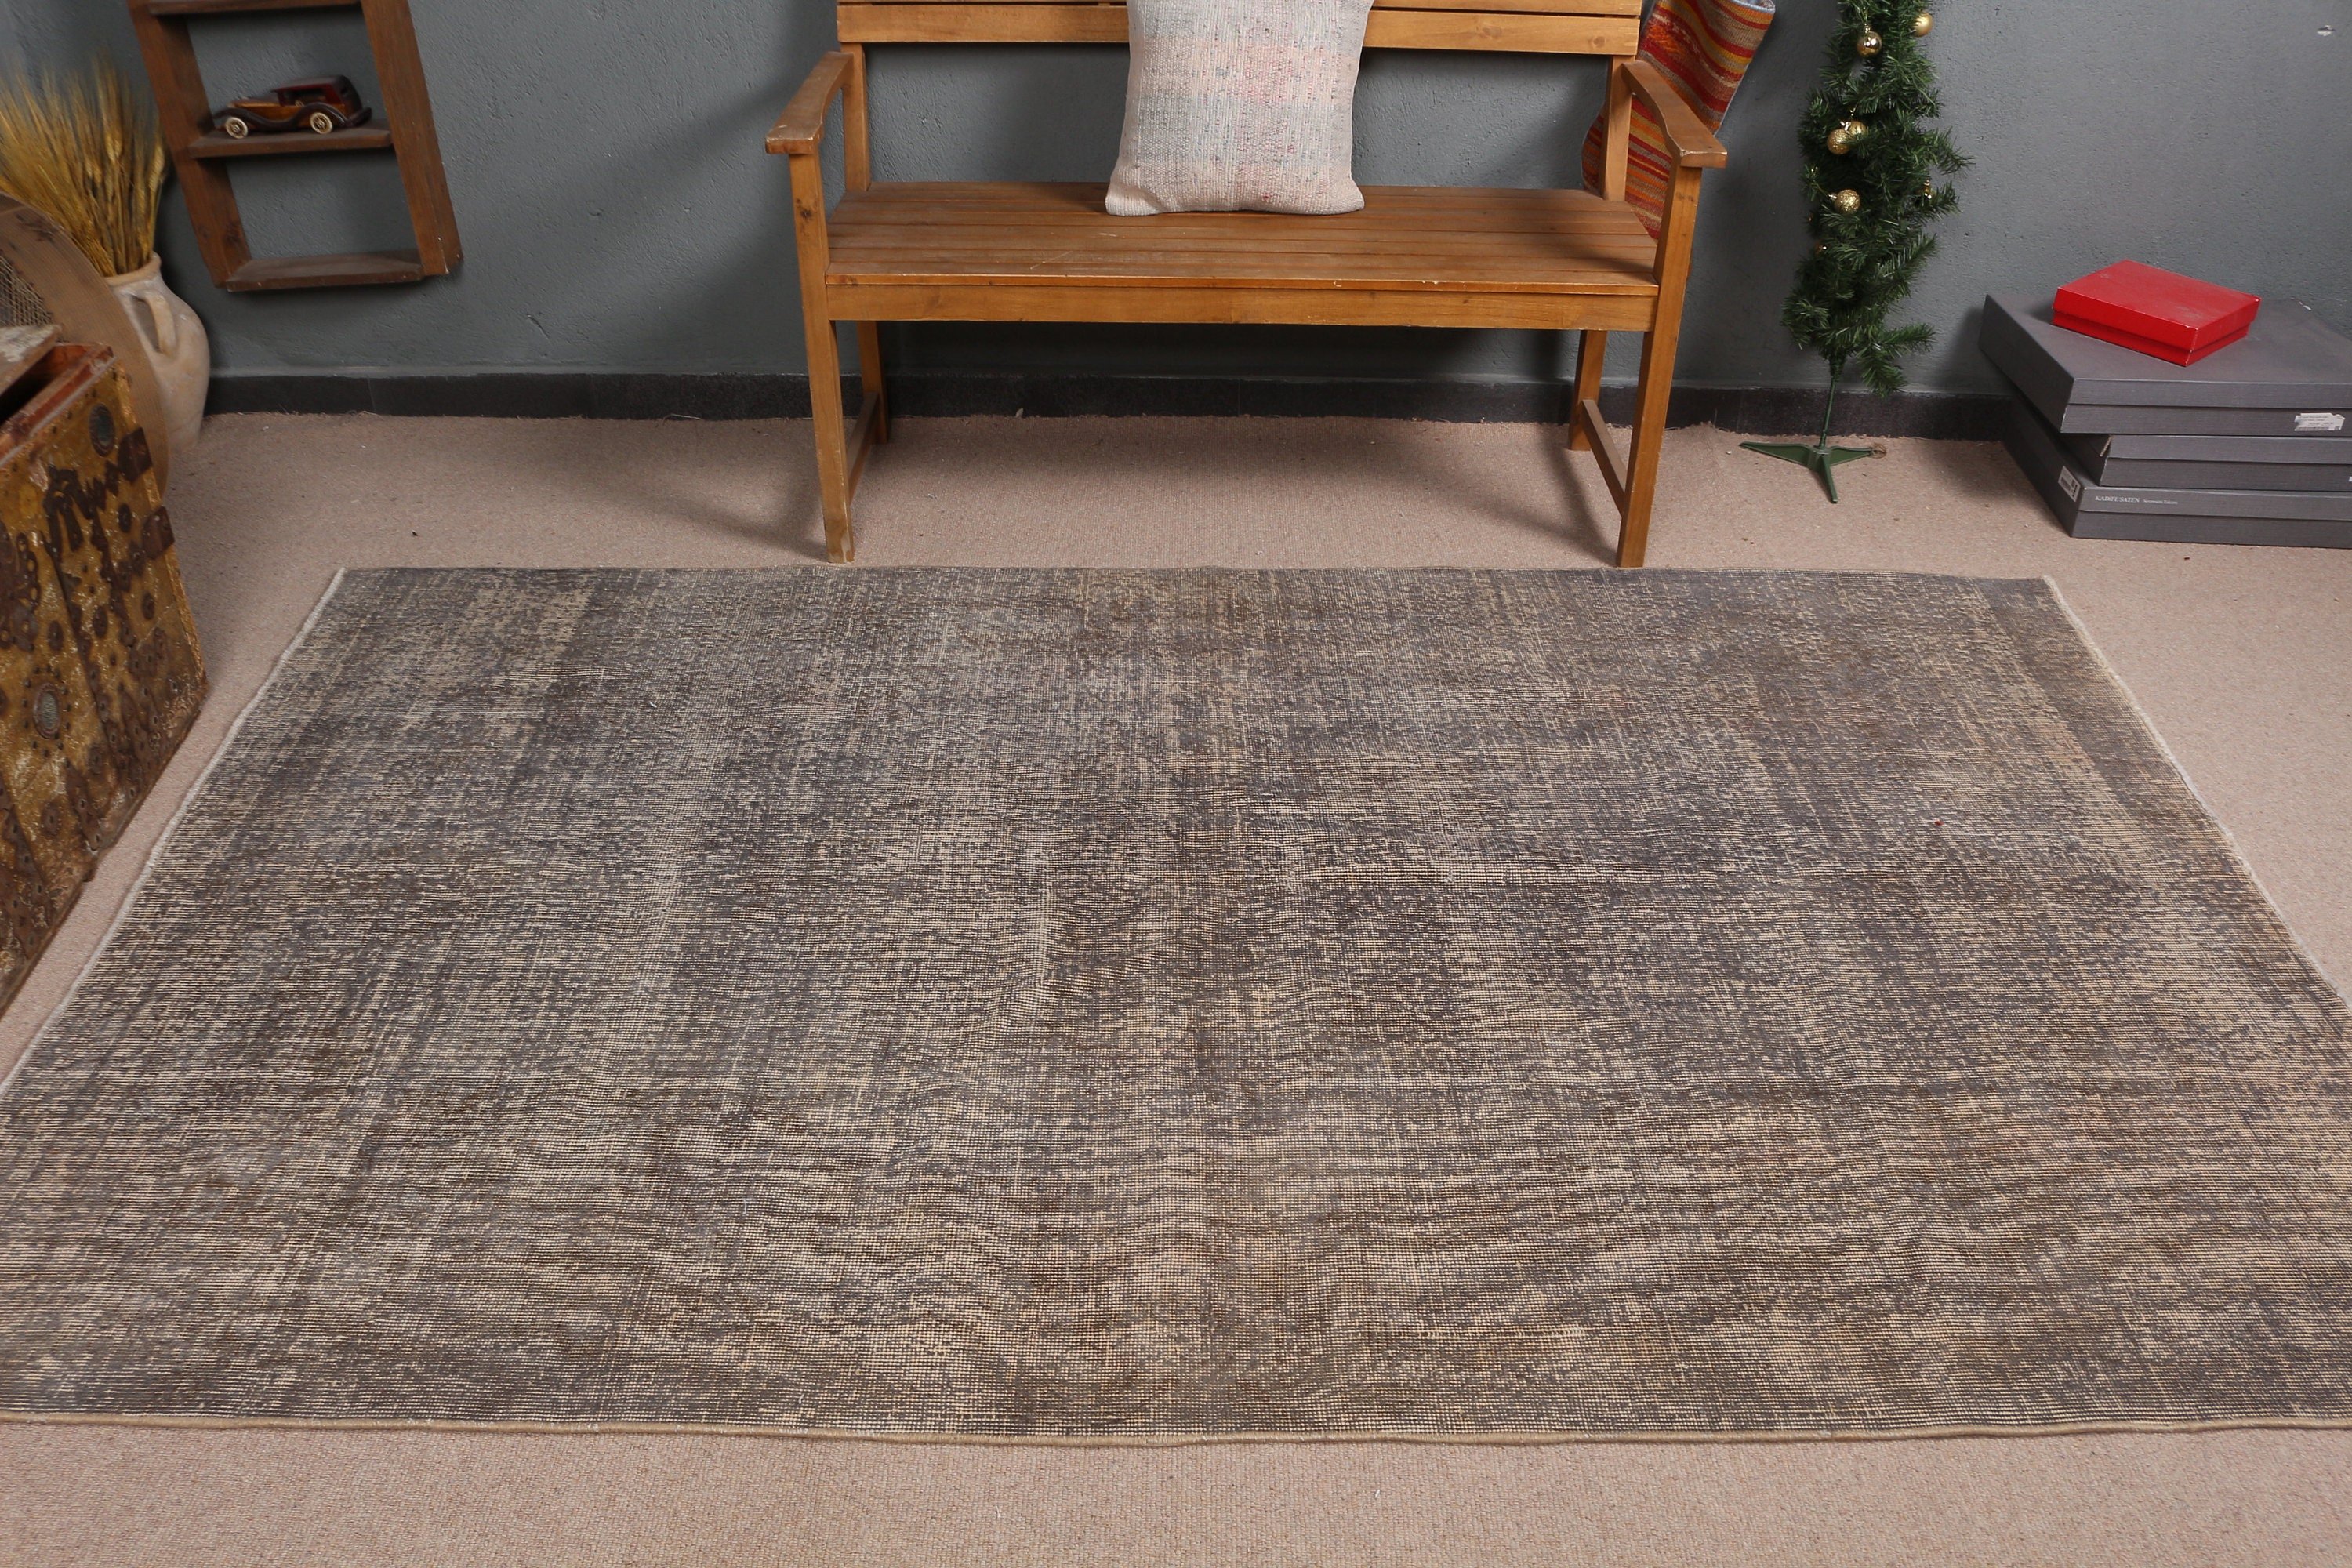 Retro Rug, Oushak Rugs, Gray Kitchen Rug, Salon Rug, Turkish Rug, Home Decor Rugs, Vintage Rugs, Dining Room Rugs, 5.2x8.2 ft Large Rugs